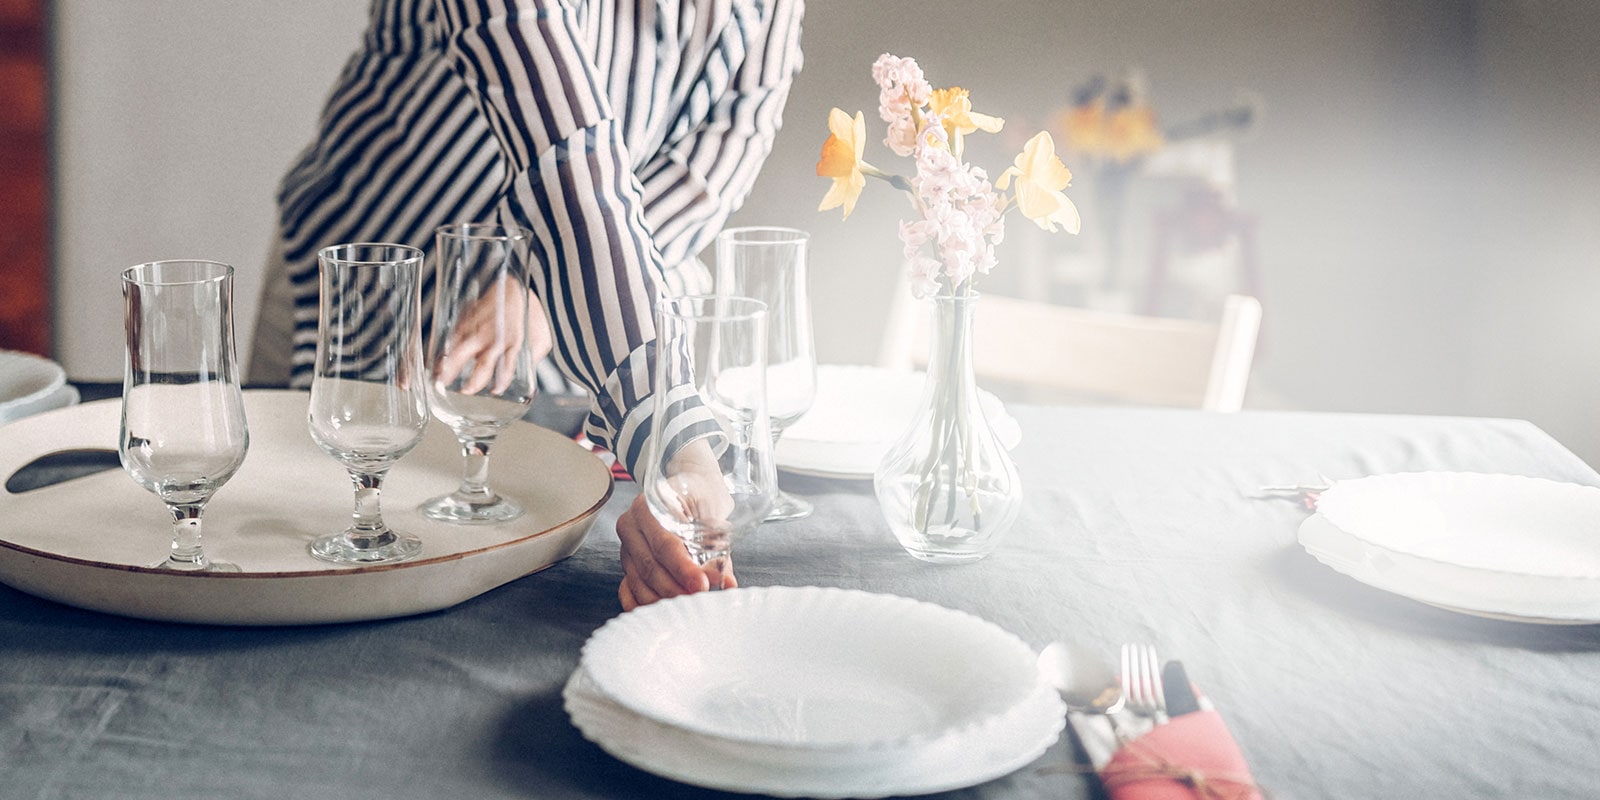 woman setting a dinner table with fresh clean glassware